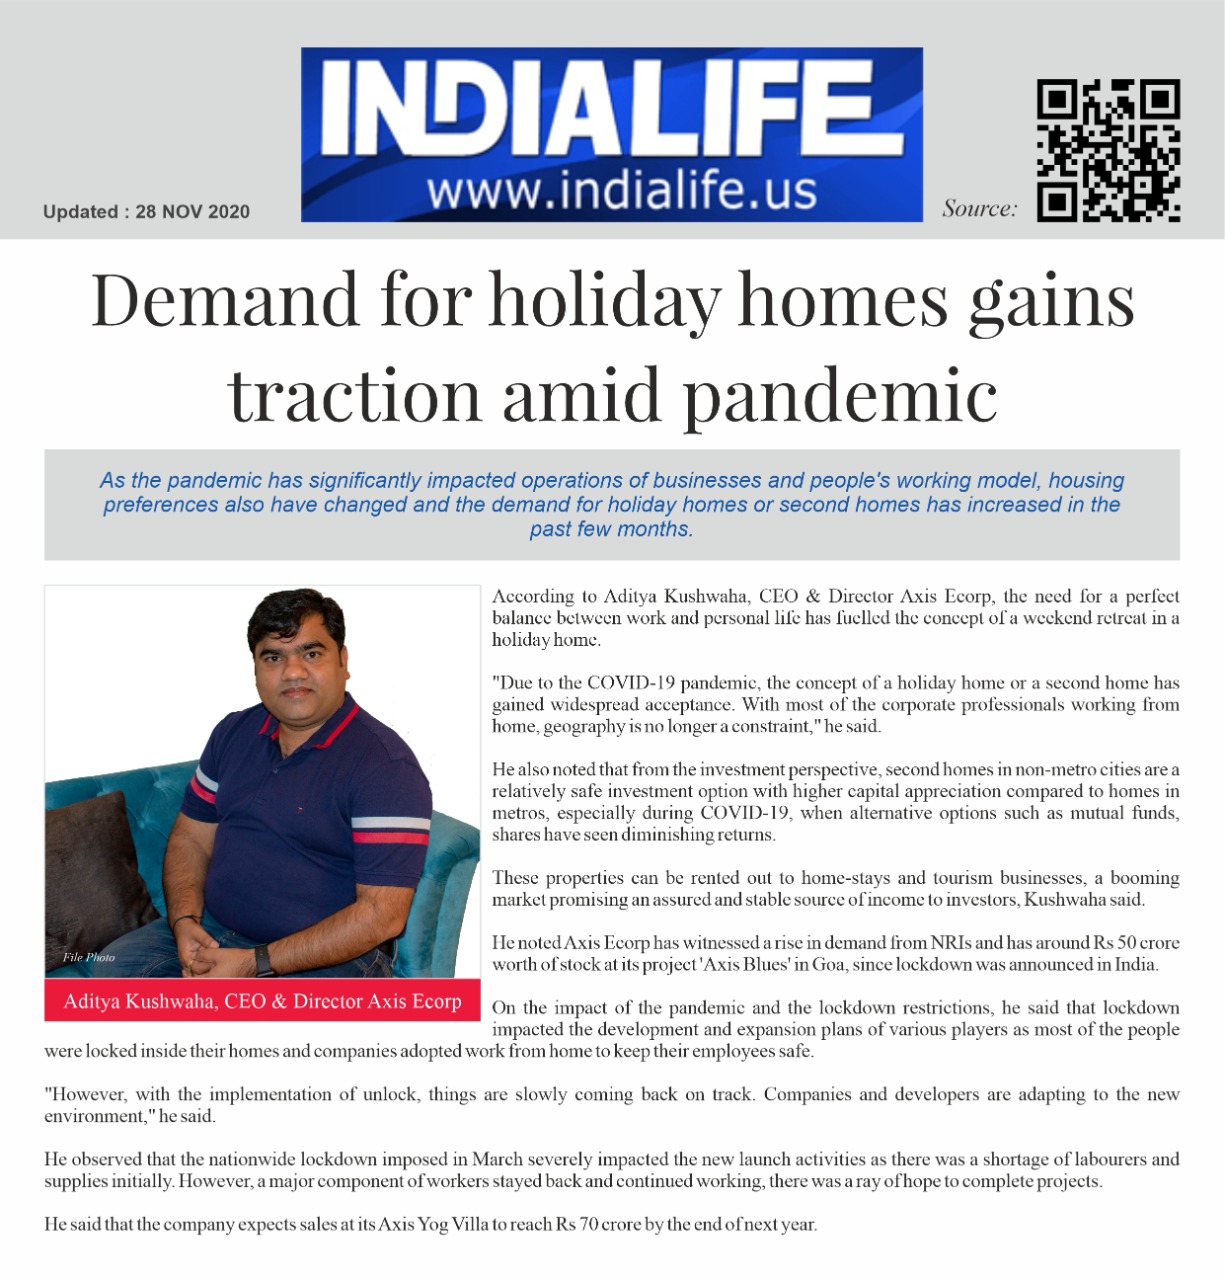 Demand for holiday homes gains traction amid pandemic